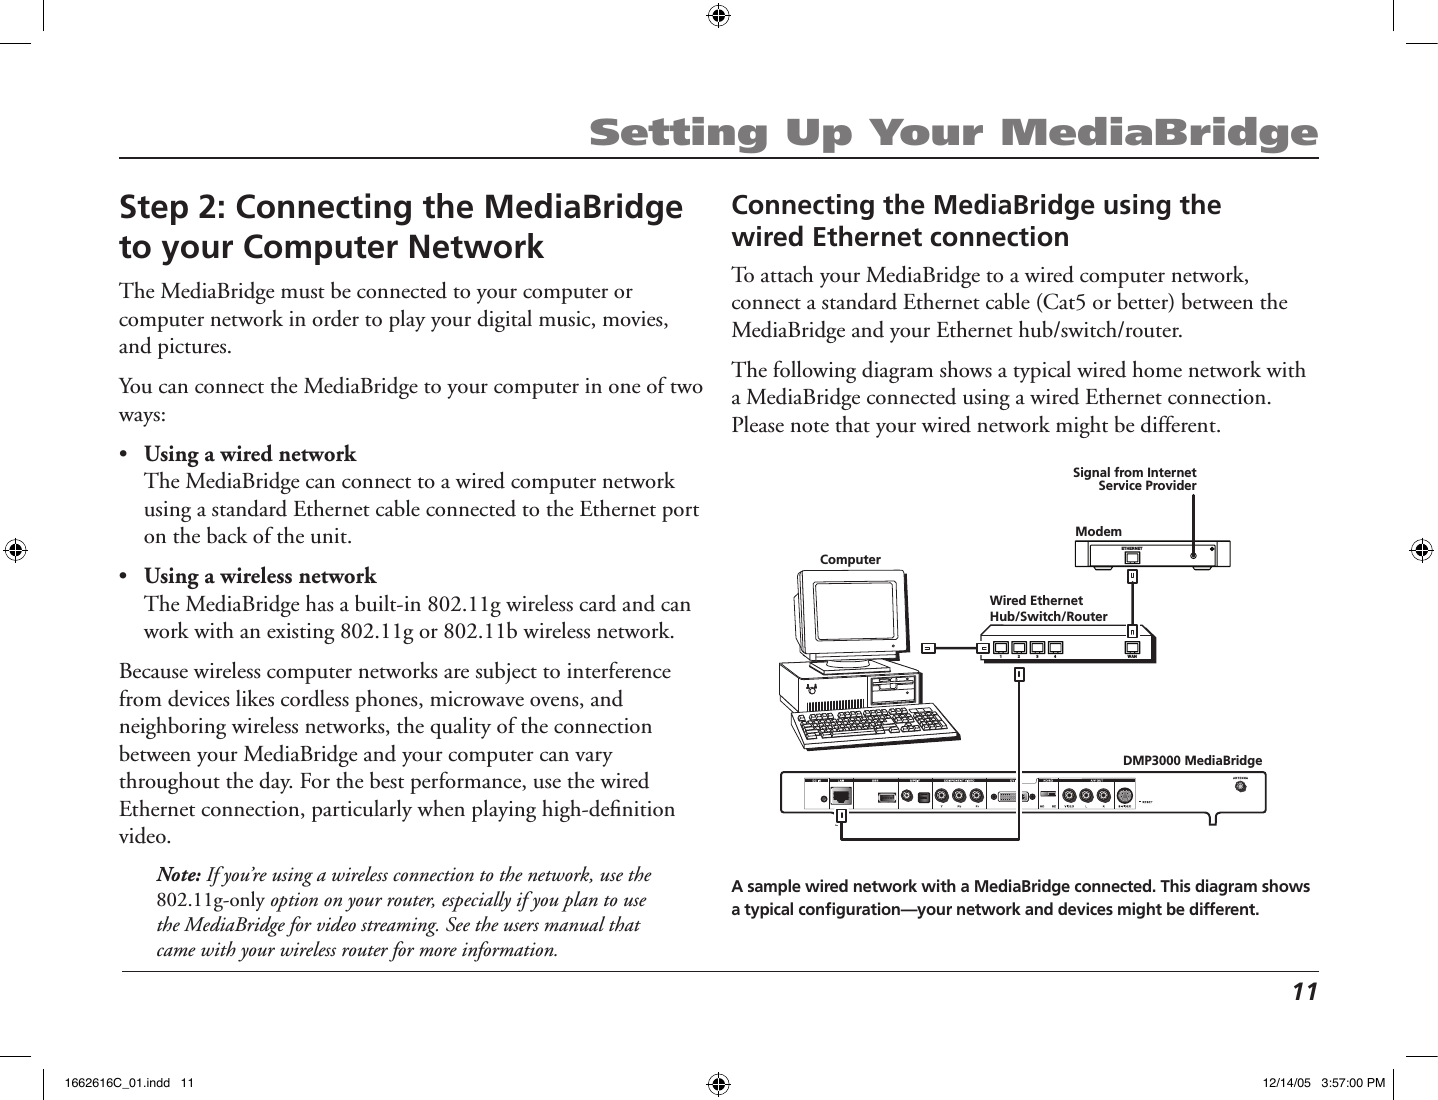  11Setting Up Your MediaBridgeStep 2: Connecting the MediaBridge to your Computer NetworkThe MediaBridge must be connected to your computer or computer network in order to play your digital music, movies, and pictures. You can connect the MediaBridge to your computer in one of two ways:•  Using a wired network  The MediaBridge can connect to a wired computer network using a standard Ethernet cable connected to the Ethernet port on the back of the unit.•  Using a wireless network  The MediaBridge has a built-in 802.11g wireless card and can work with an existing 802.11g or 802.11b wireless network.Because wireless computer networks are subject to interference from devices likes cordless phones, microwave ovens, and neighboring wireless networks, the quality of the connection between your MediaBridge and your computer can vary throughout the day. For the best performance, use the wired Ethernet connection, particularly when playing high-deﬁnition video.Note: If you’re using a wireless connection to the network, use the 802.11g-only option on your router, especially if you plan to use the MediaBridge for video streaming. See the users manual that came with your wireless router for more information.Connecting the MediaBridge using the  wired Ethernet connectionTo attach your MediaBridge to a wired computer network, connect a standard Ethernet cable (Cat5 or better) between the MediaBridge and your Ethernet hub/switch/router.The following diagram shows a typical wired home network with a MediaBridge connected using a wired Ethernet connection. Please note that your wired network might be different.DMP3000 MediaBridgeWired EthernetHub/Switch/Router   WAN   1 2    3 4   ETHERNETModemSignal from InternetService ProviderComputerA sample wired network with a MediaBridge connected. This diagram shows a typical conﬁguration—your network and devices might be different.1662616C_01.indd   11 12/14/05   3:57:00 PM